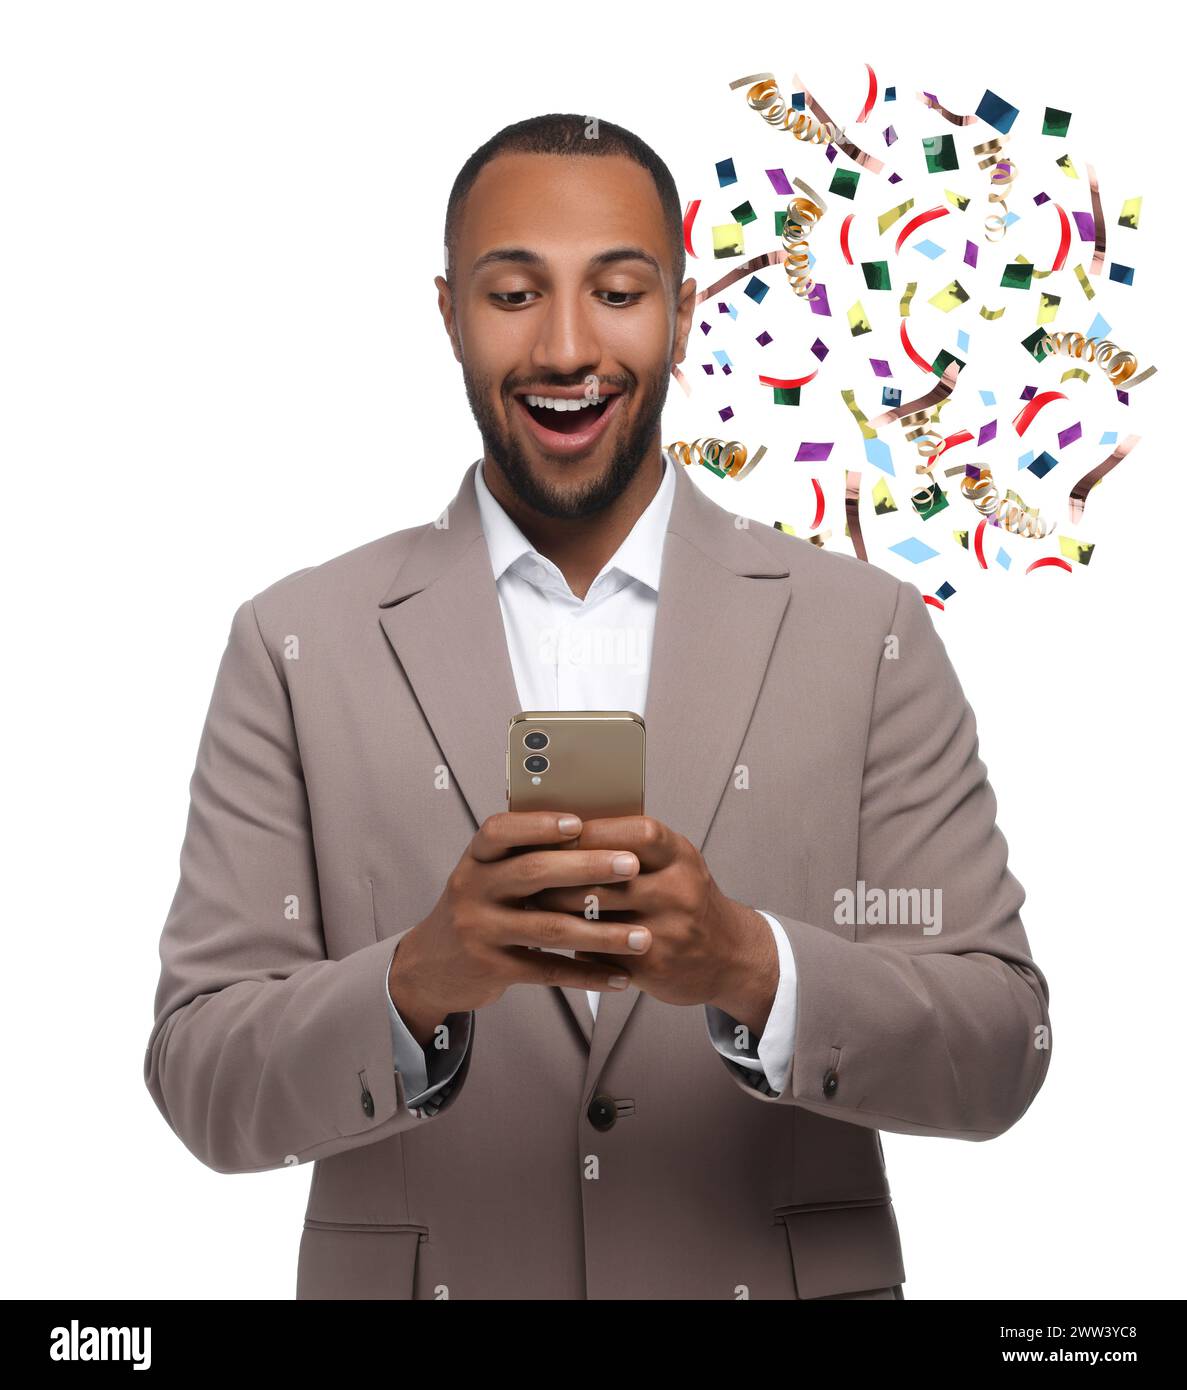 Discount offer. Happy businessman holding smartphone on white background. Confetti and streamers near him Stock Photo